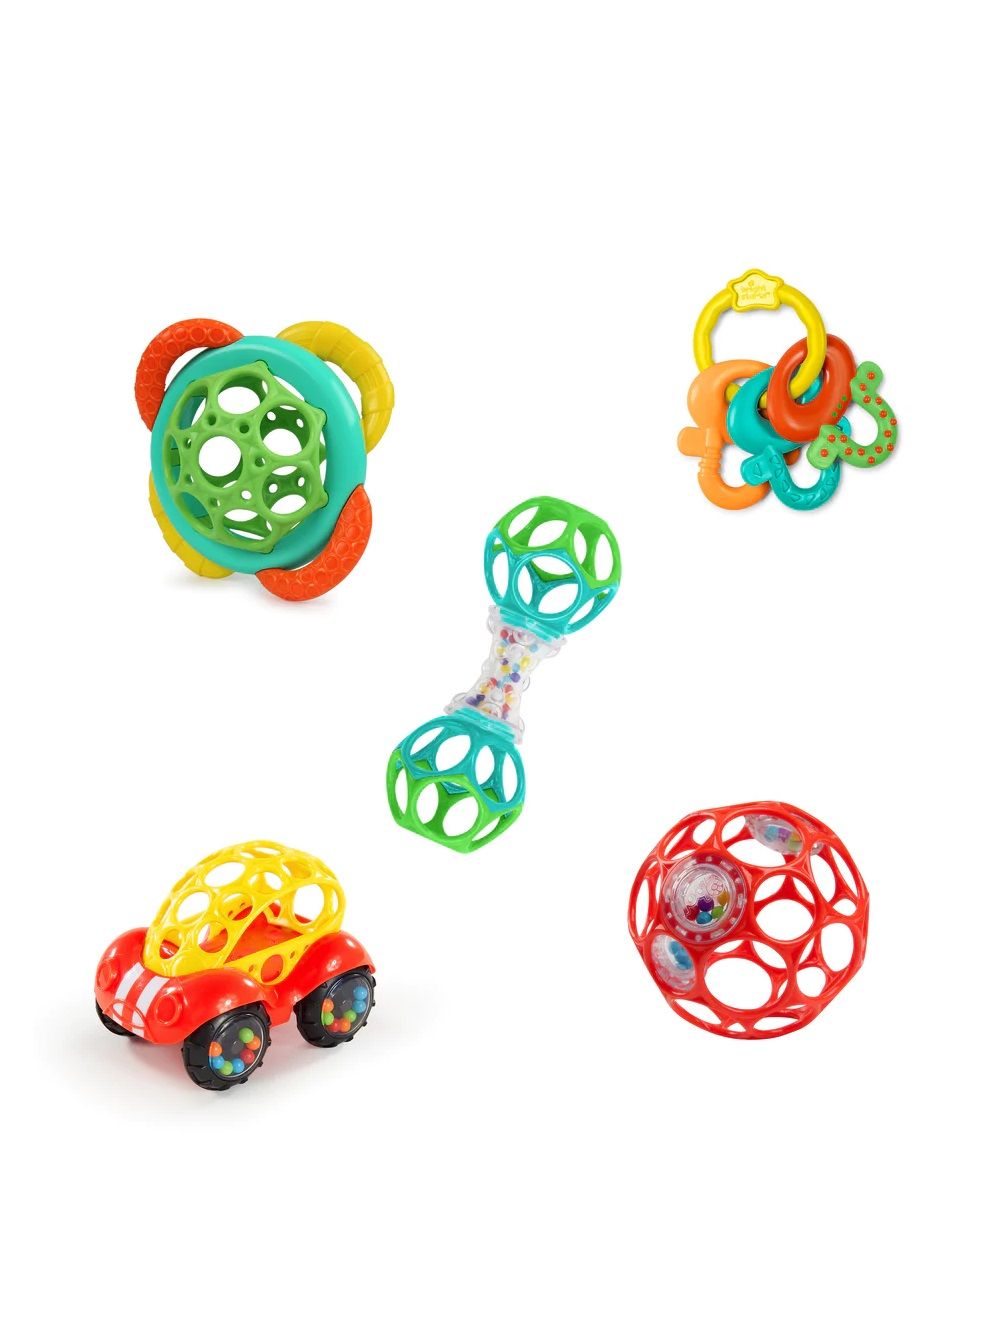 Buy Colorful 5 Pieces Baby Rattles Set Online In Pakistan At